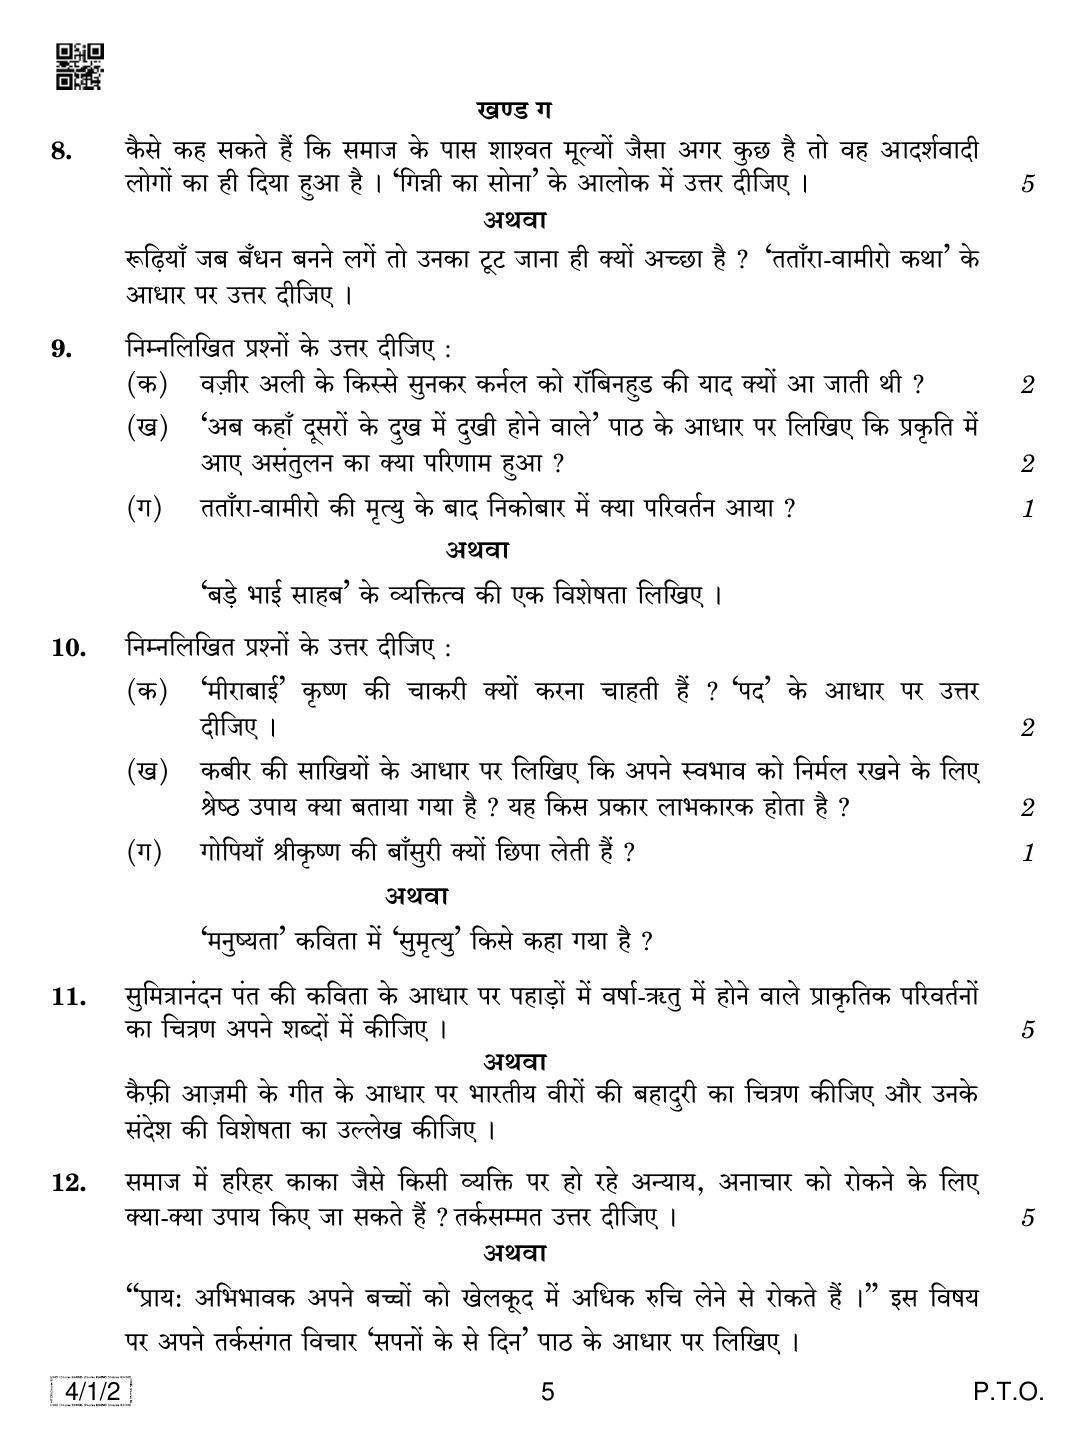 CBSE Class 10 4-1-2 HINDI B 2019 Compartment Question Paper - Page 5